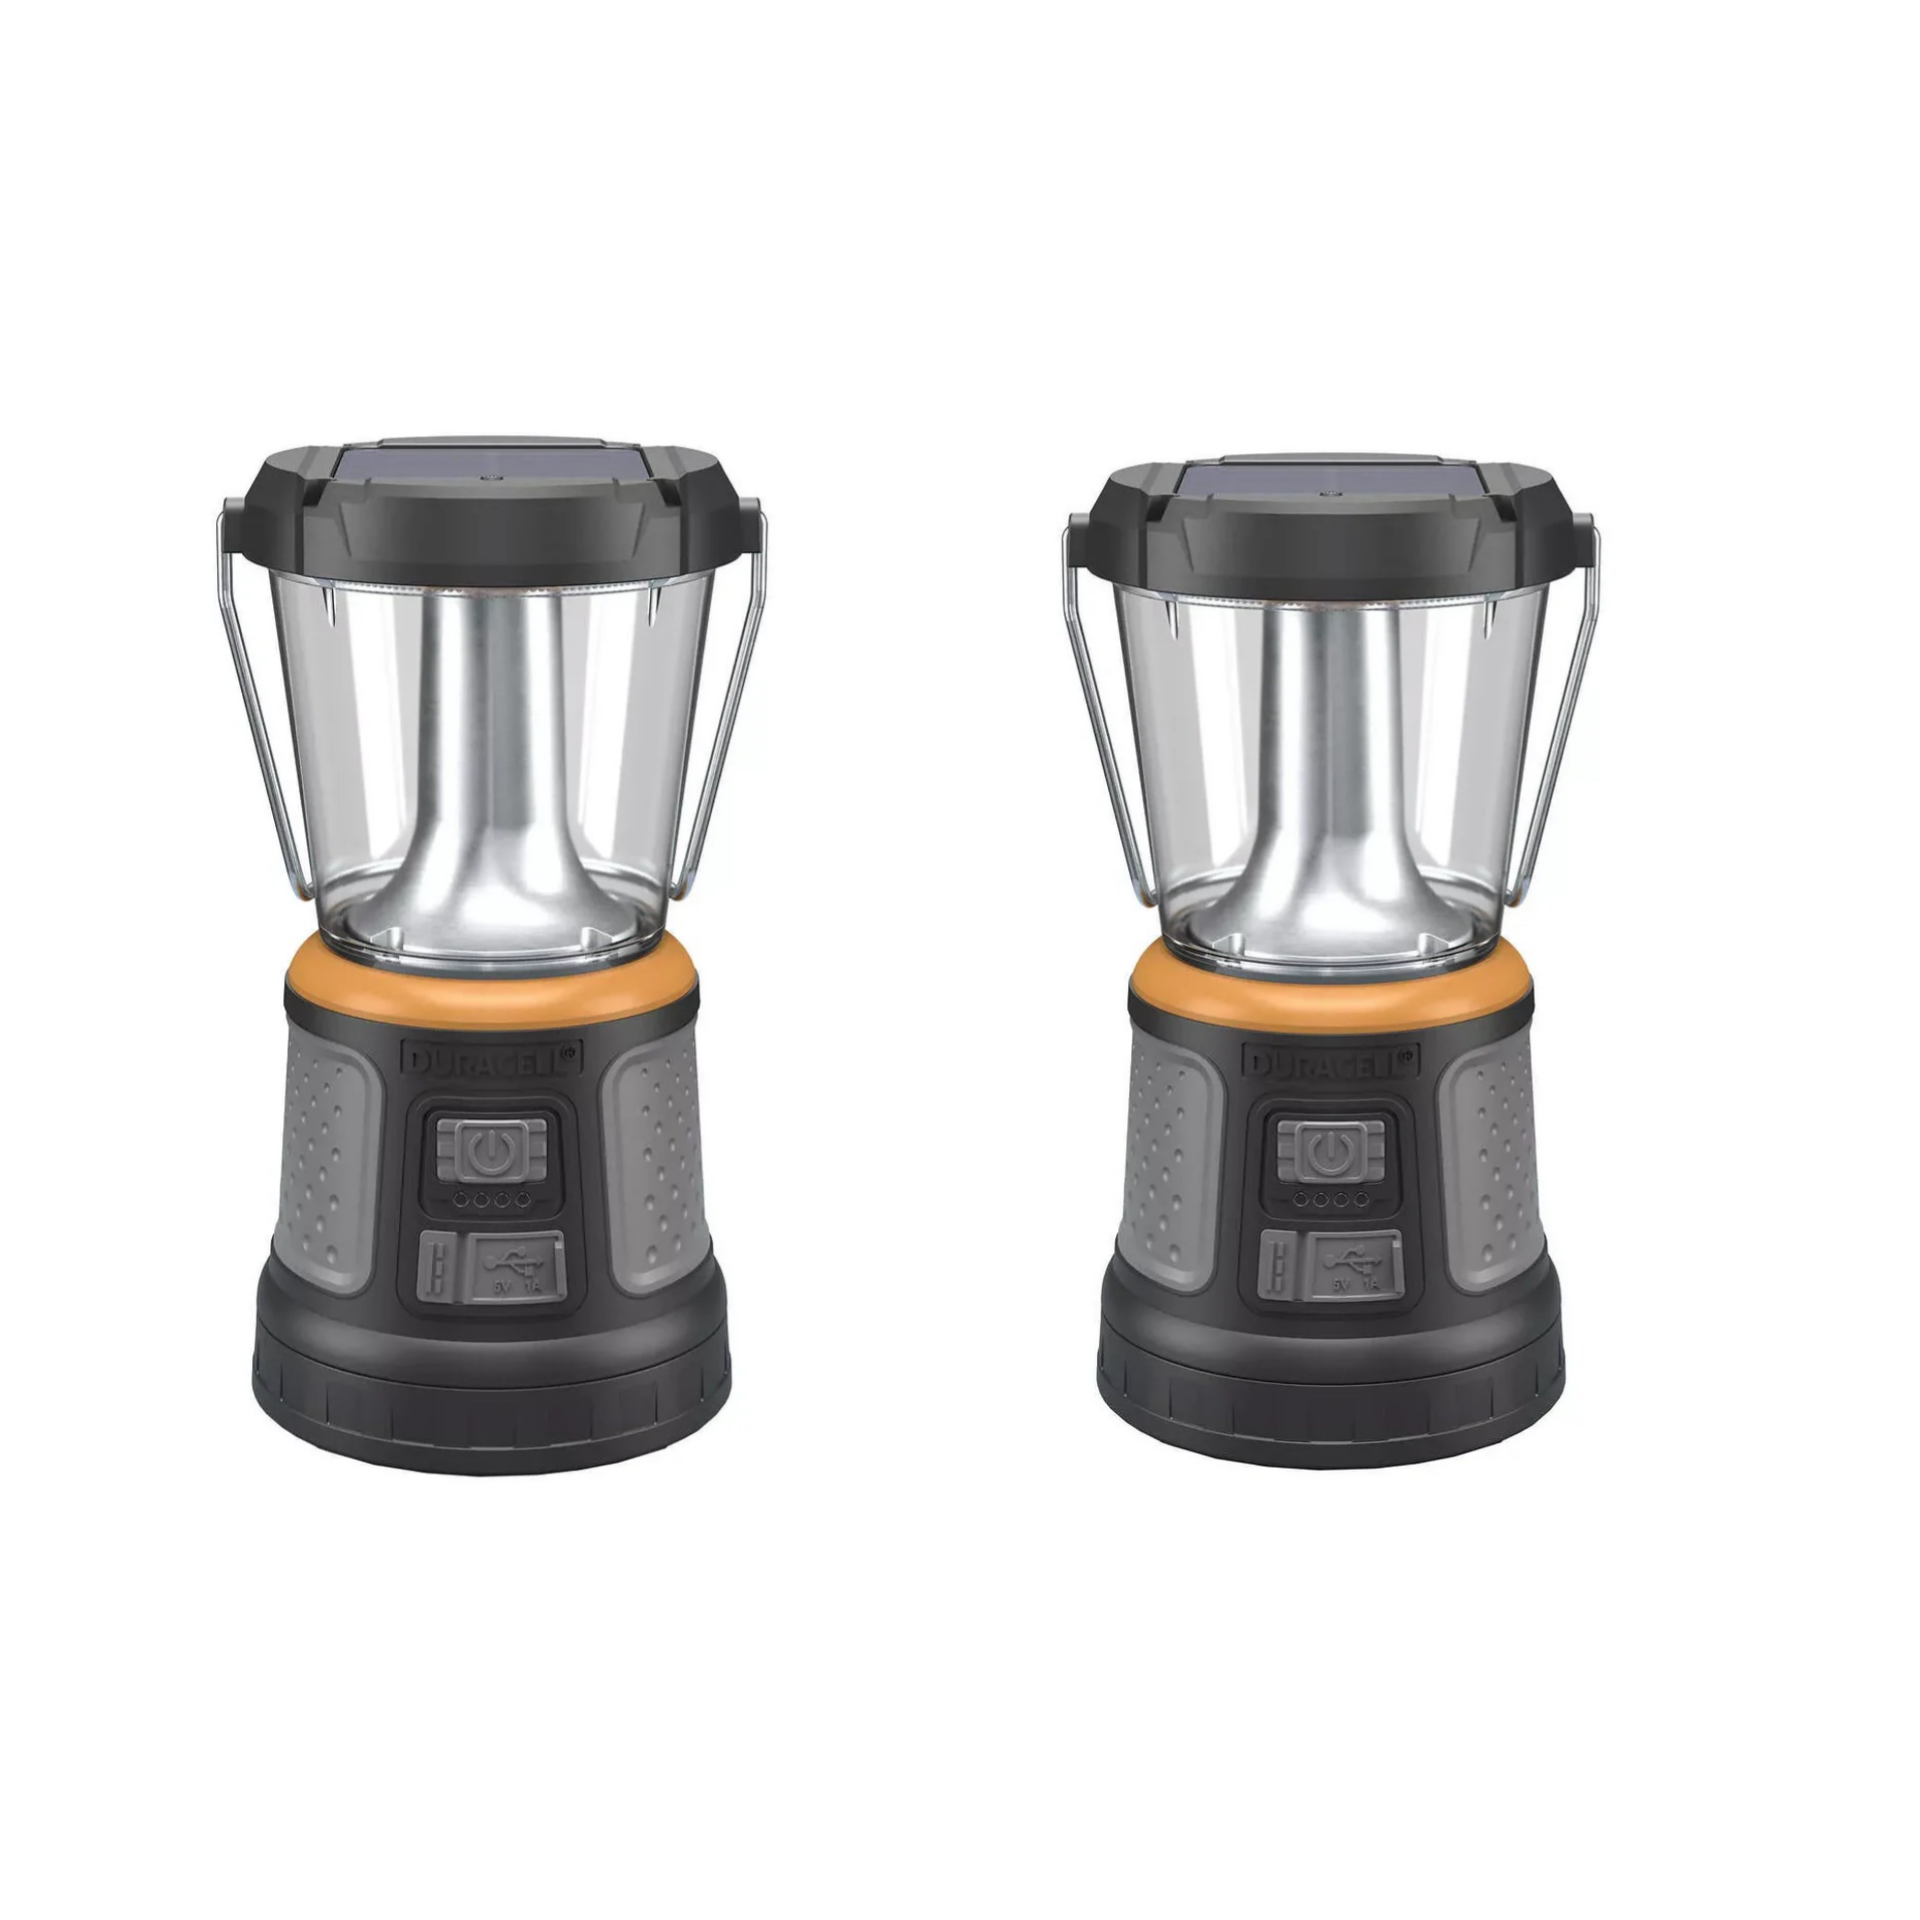 Duracell 2000 Lumens Lantern Tri Power Rechargeable - Pack of 2